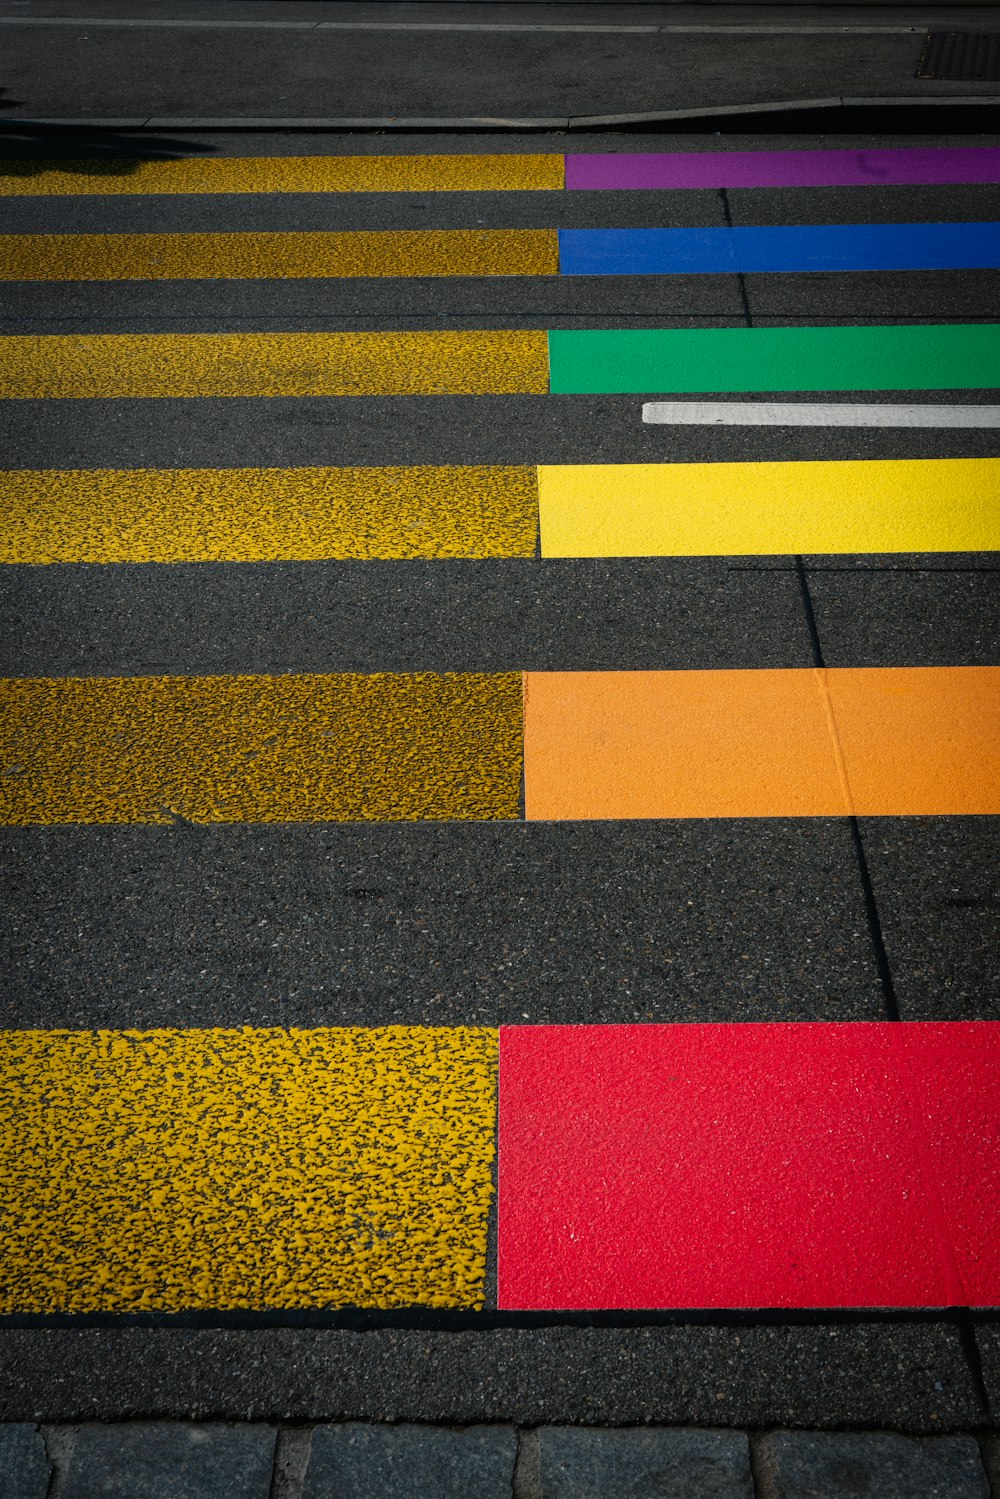 a crosswalk painted in different colors of yellow, red, green, blue,